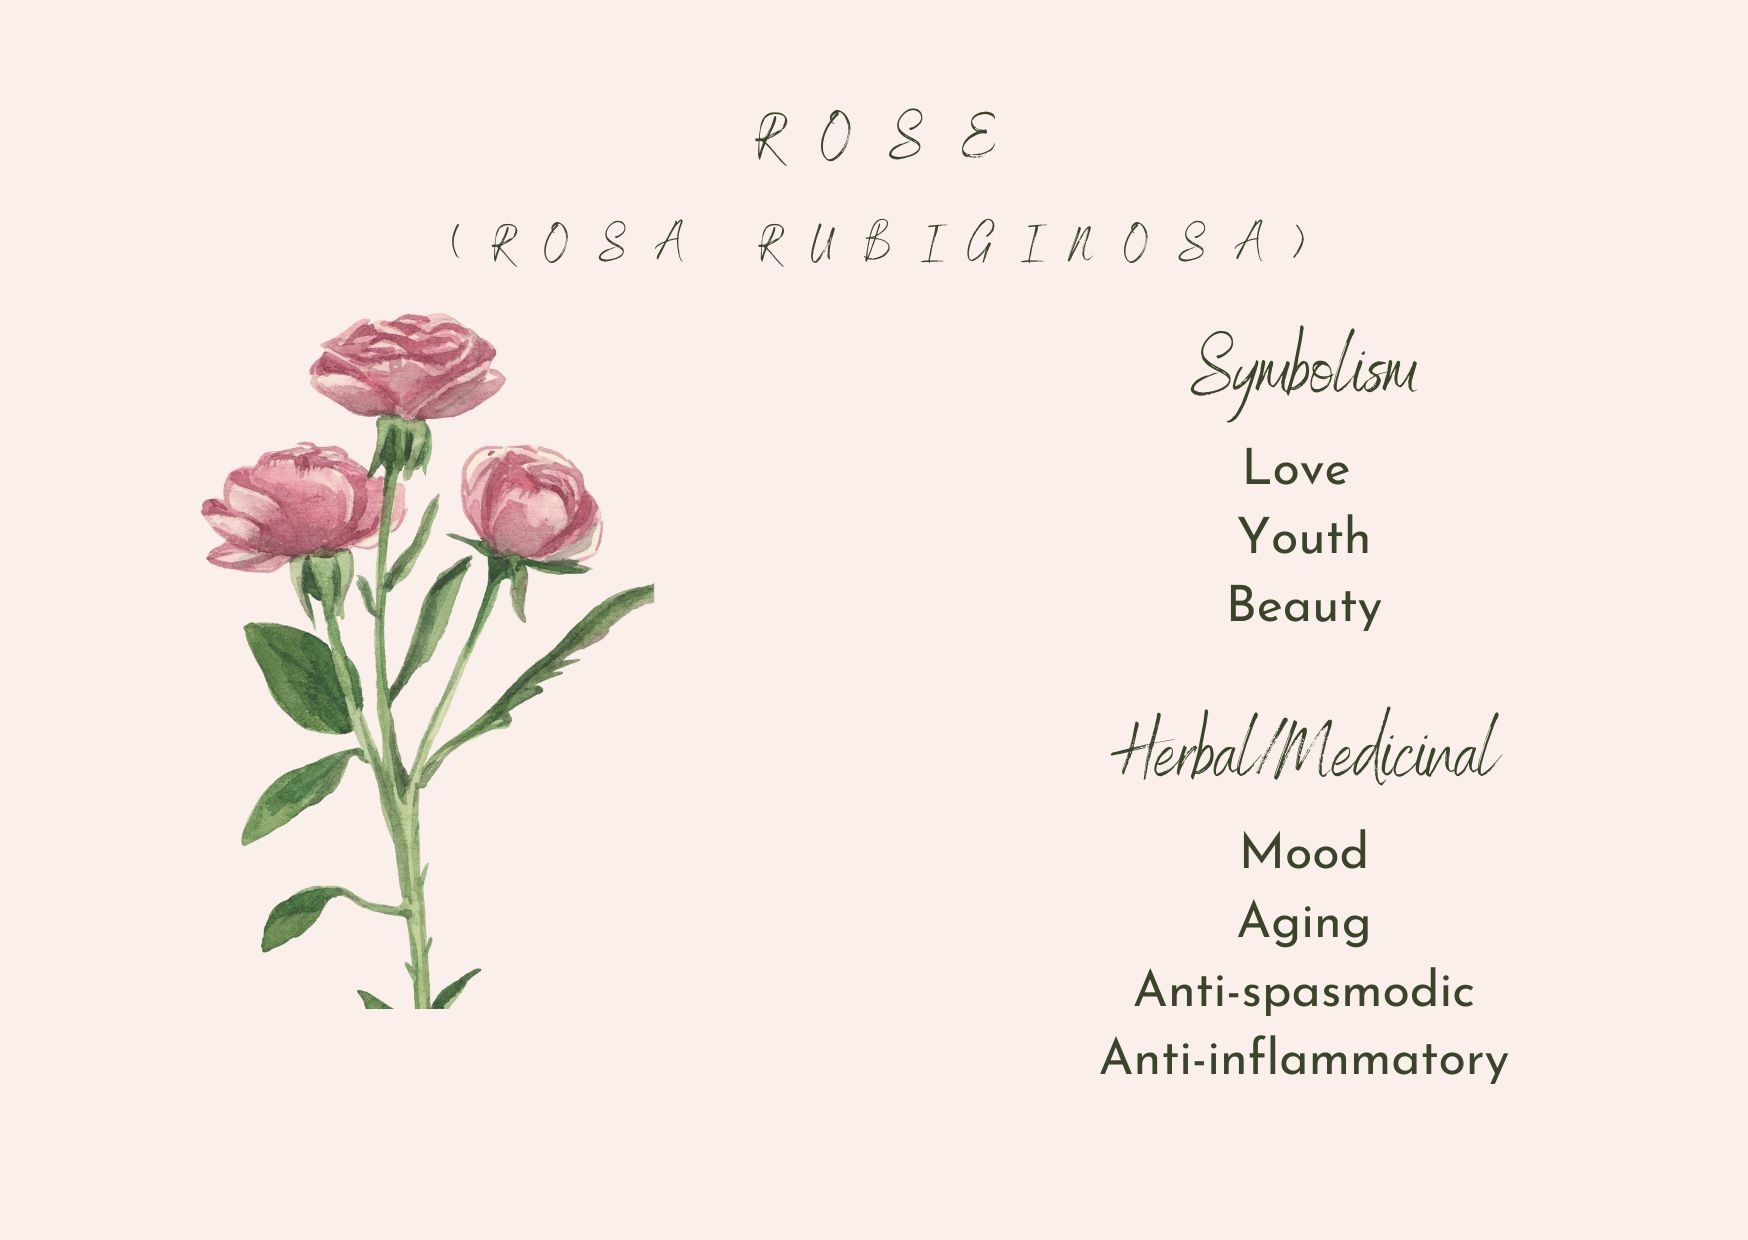 Image depicting pink roses and text with the symbolism and herbal/medicinal properties of roses 